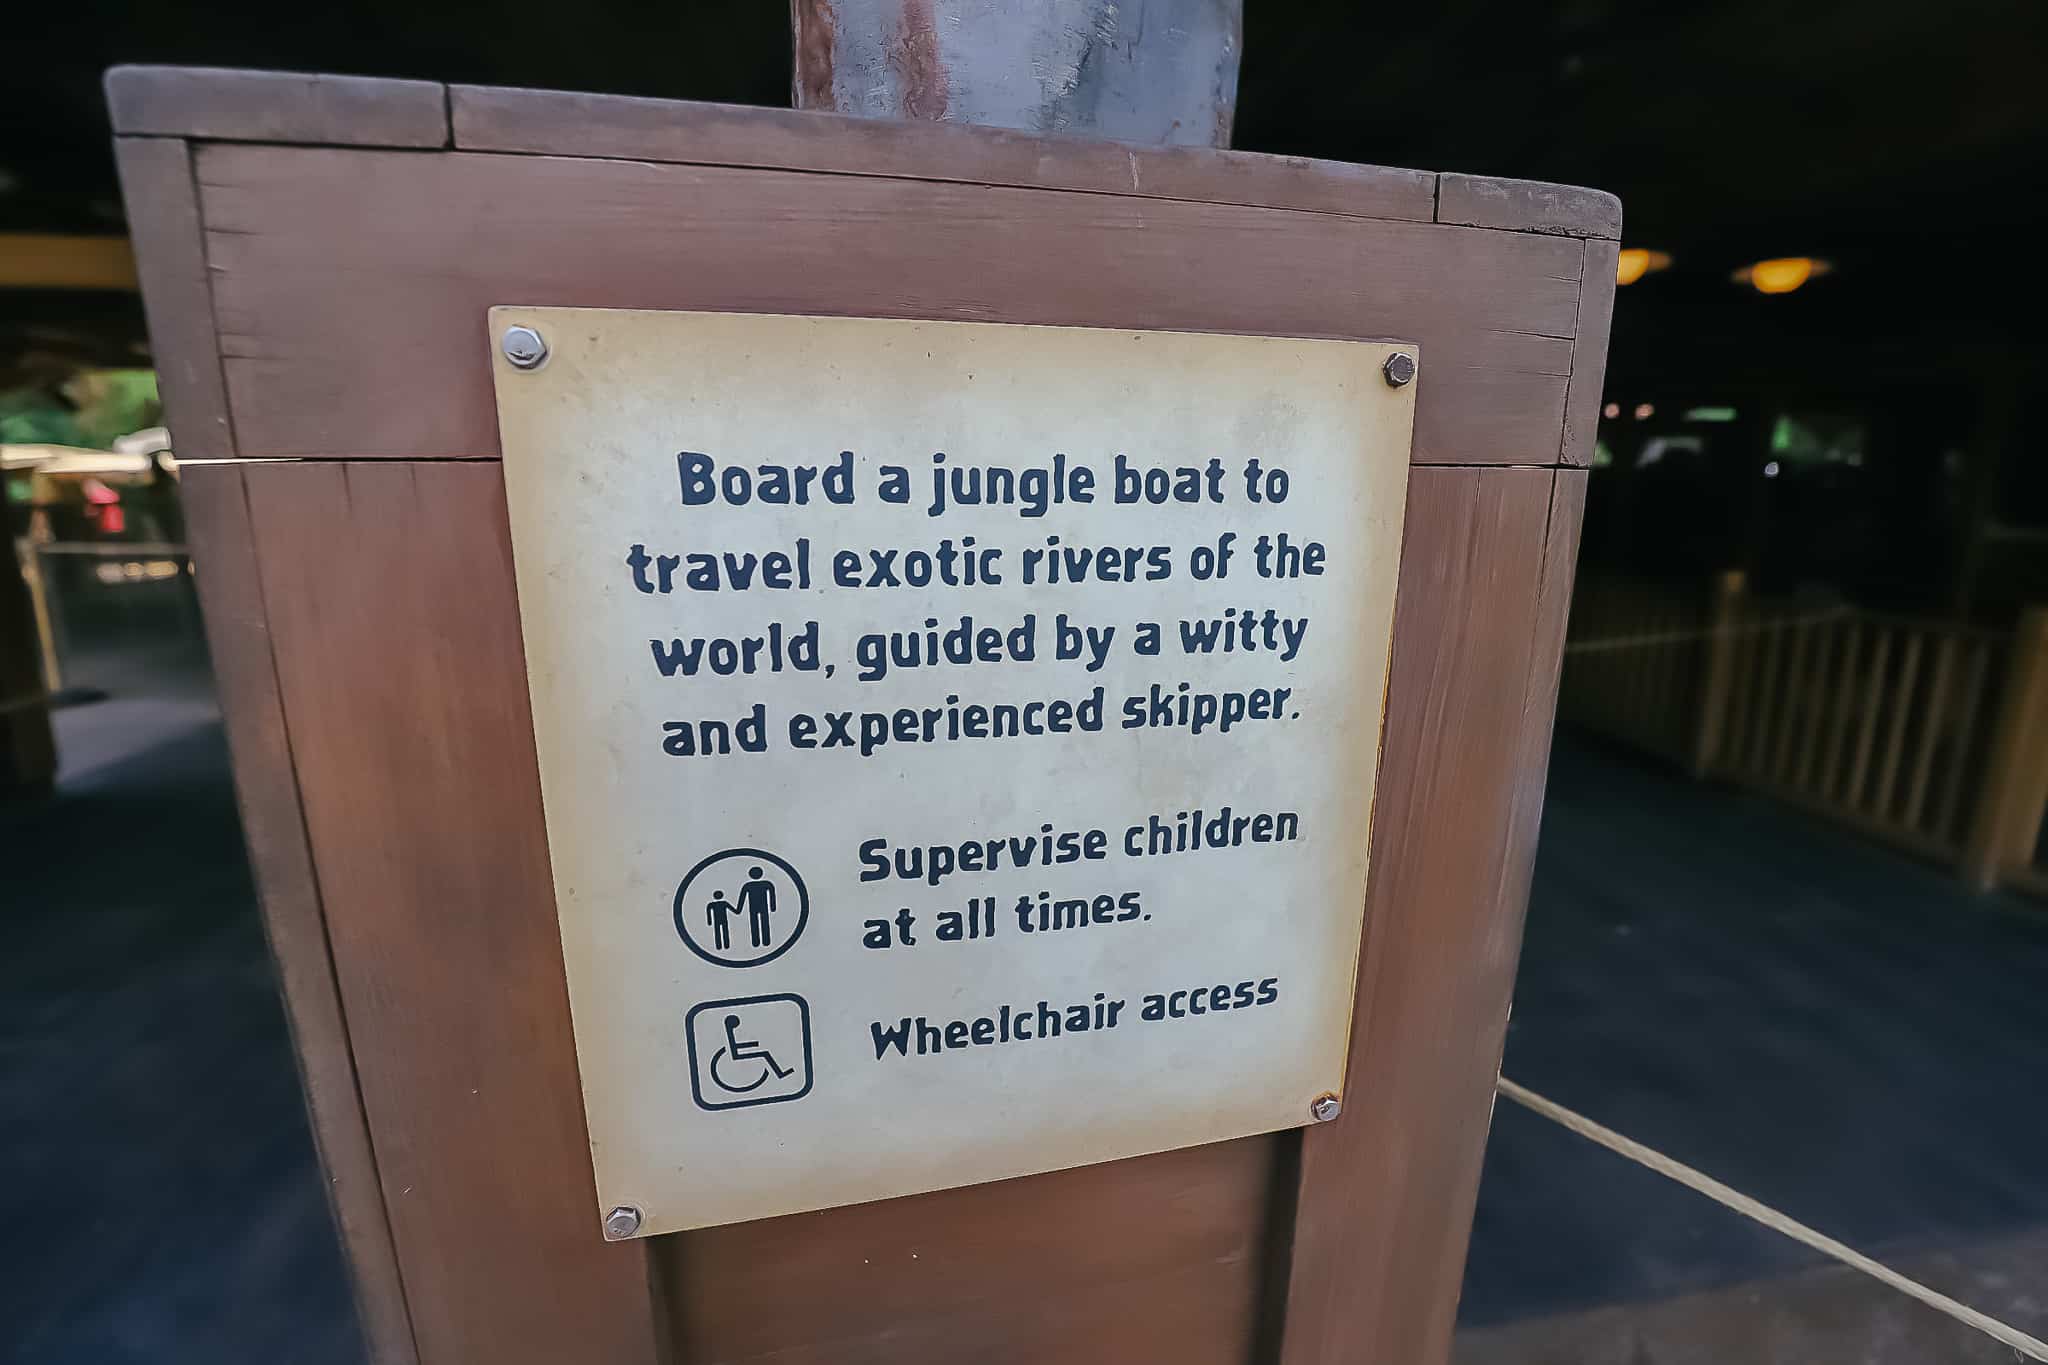 Sign reads, "board a jungle boat to travel exotic rivers of the world, guided by a witty and experienced skipper. Supervise children at all times. Wheelchair access